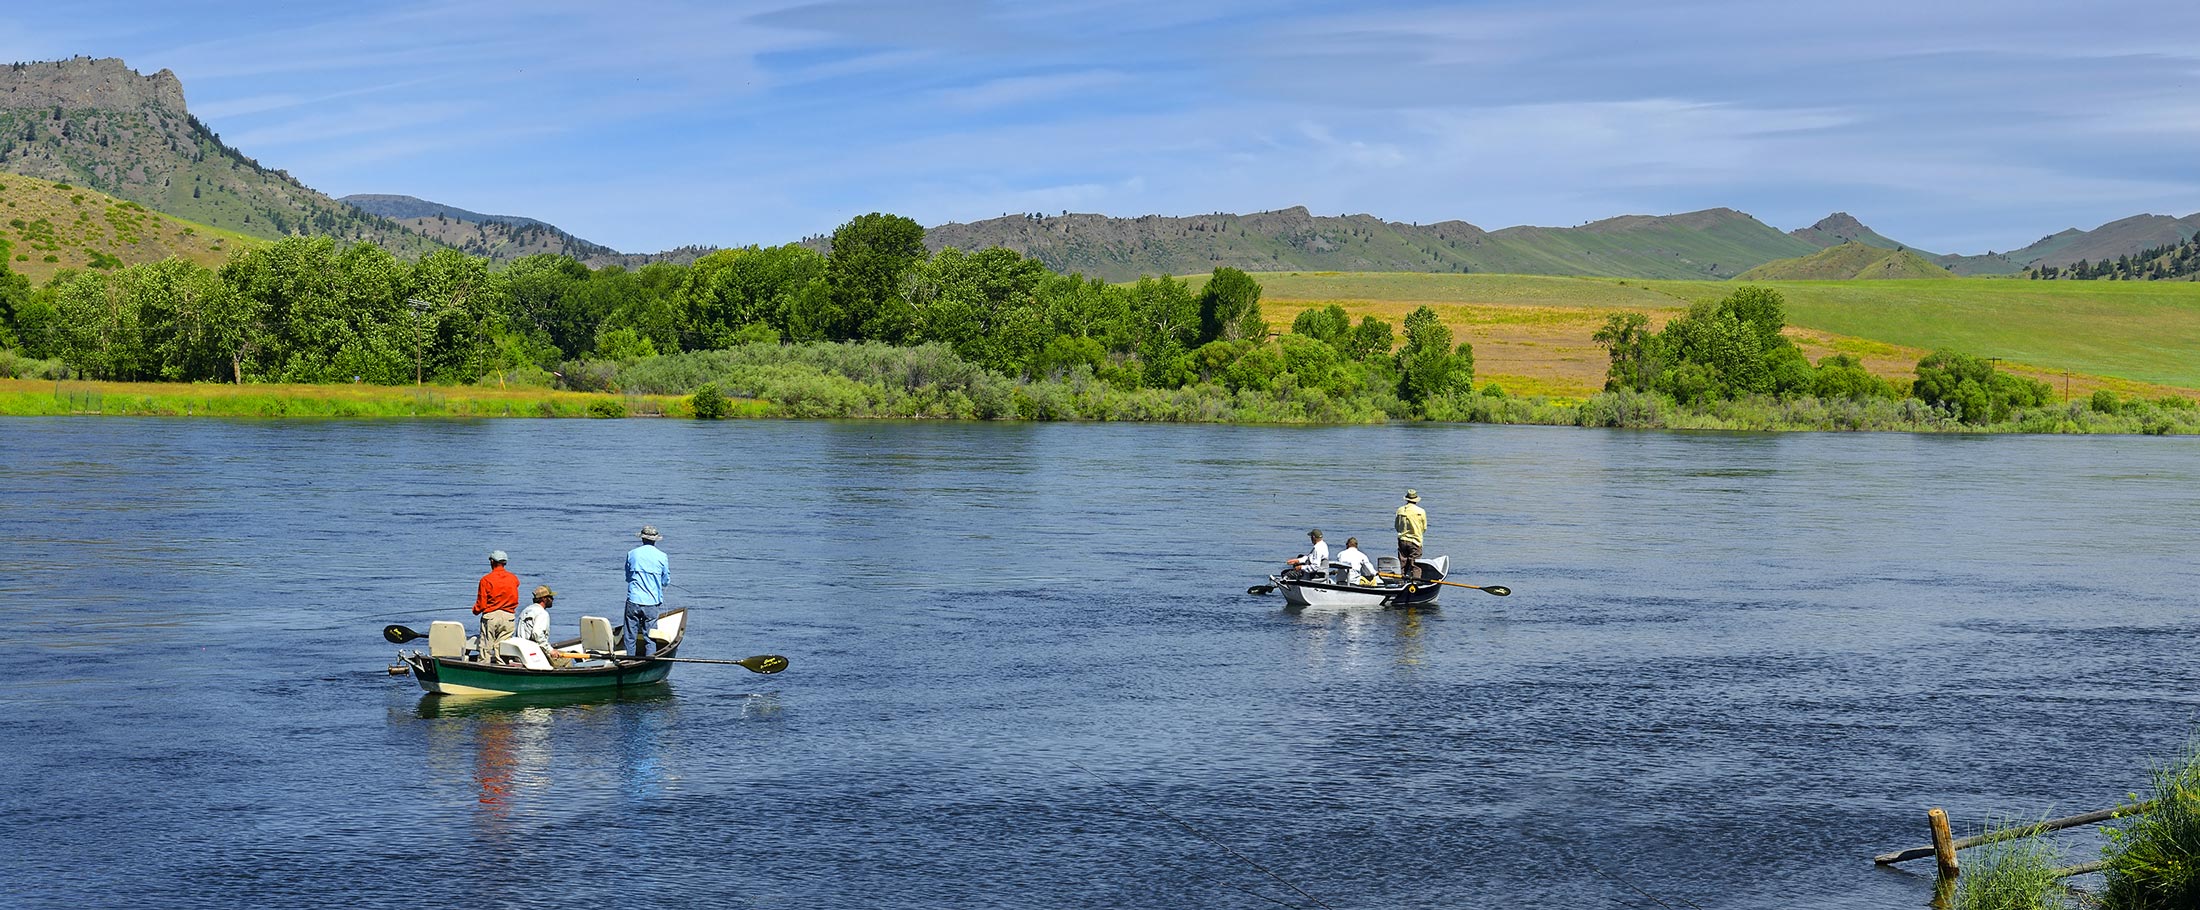 Outfitters and Guides in Montana's Missouri River Country